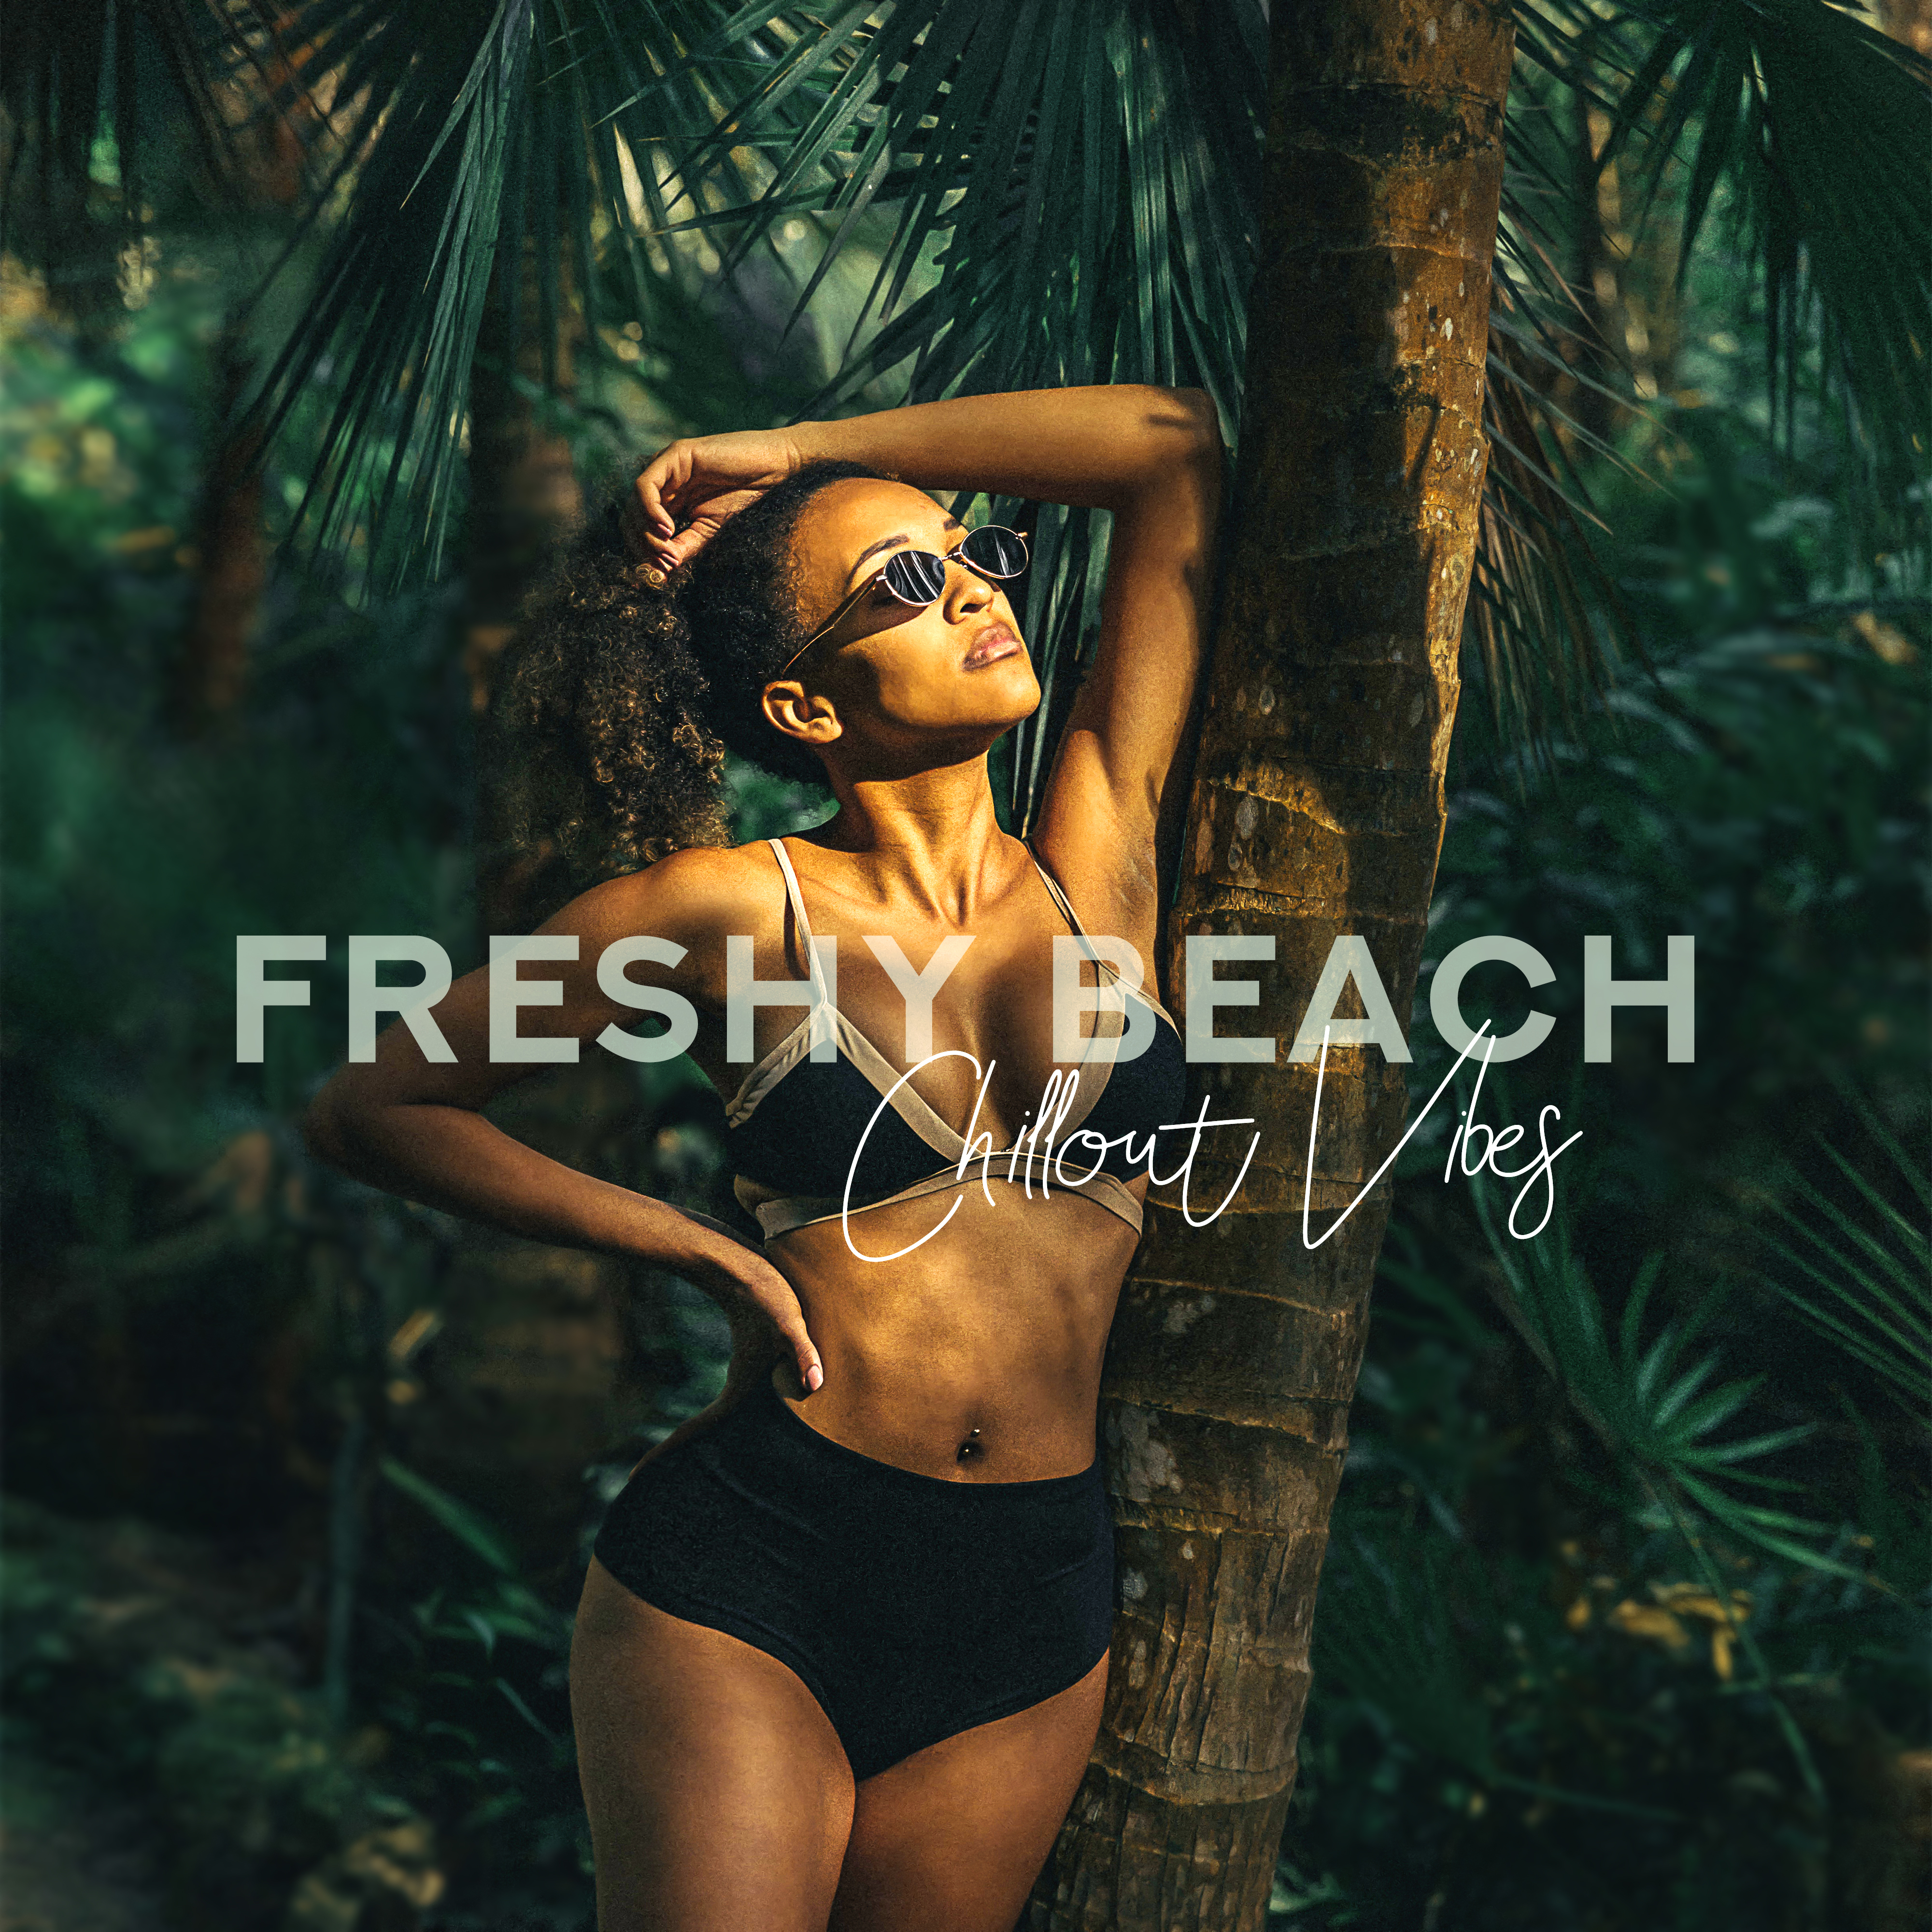 Freshy Beach Chillout Vibes